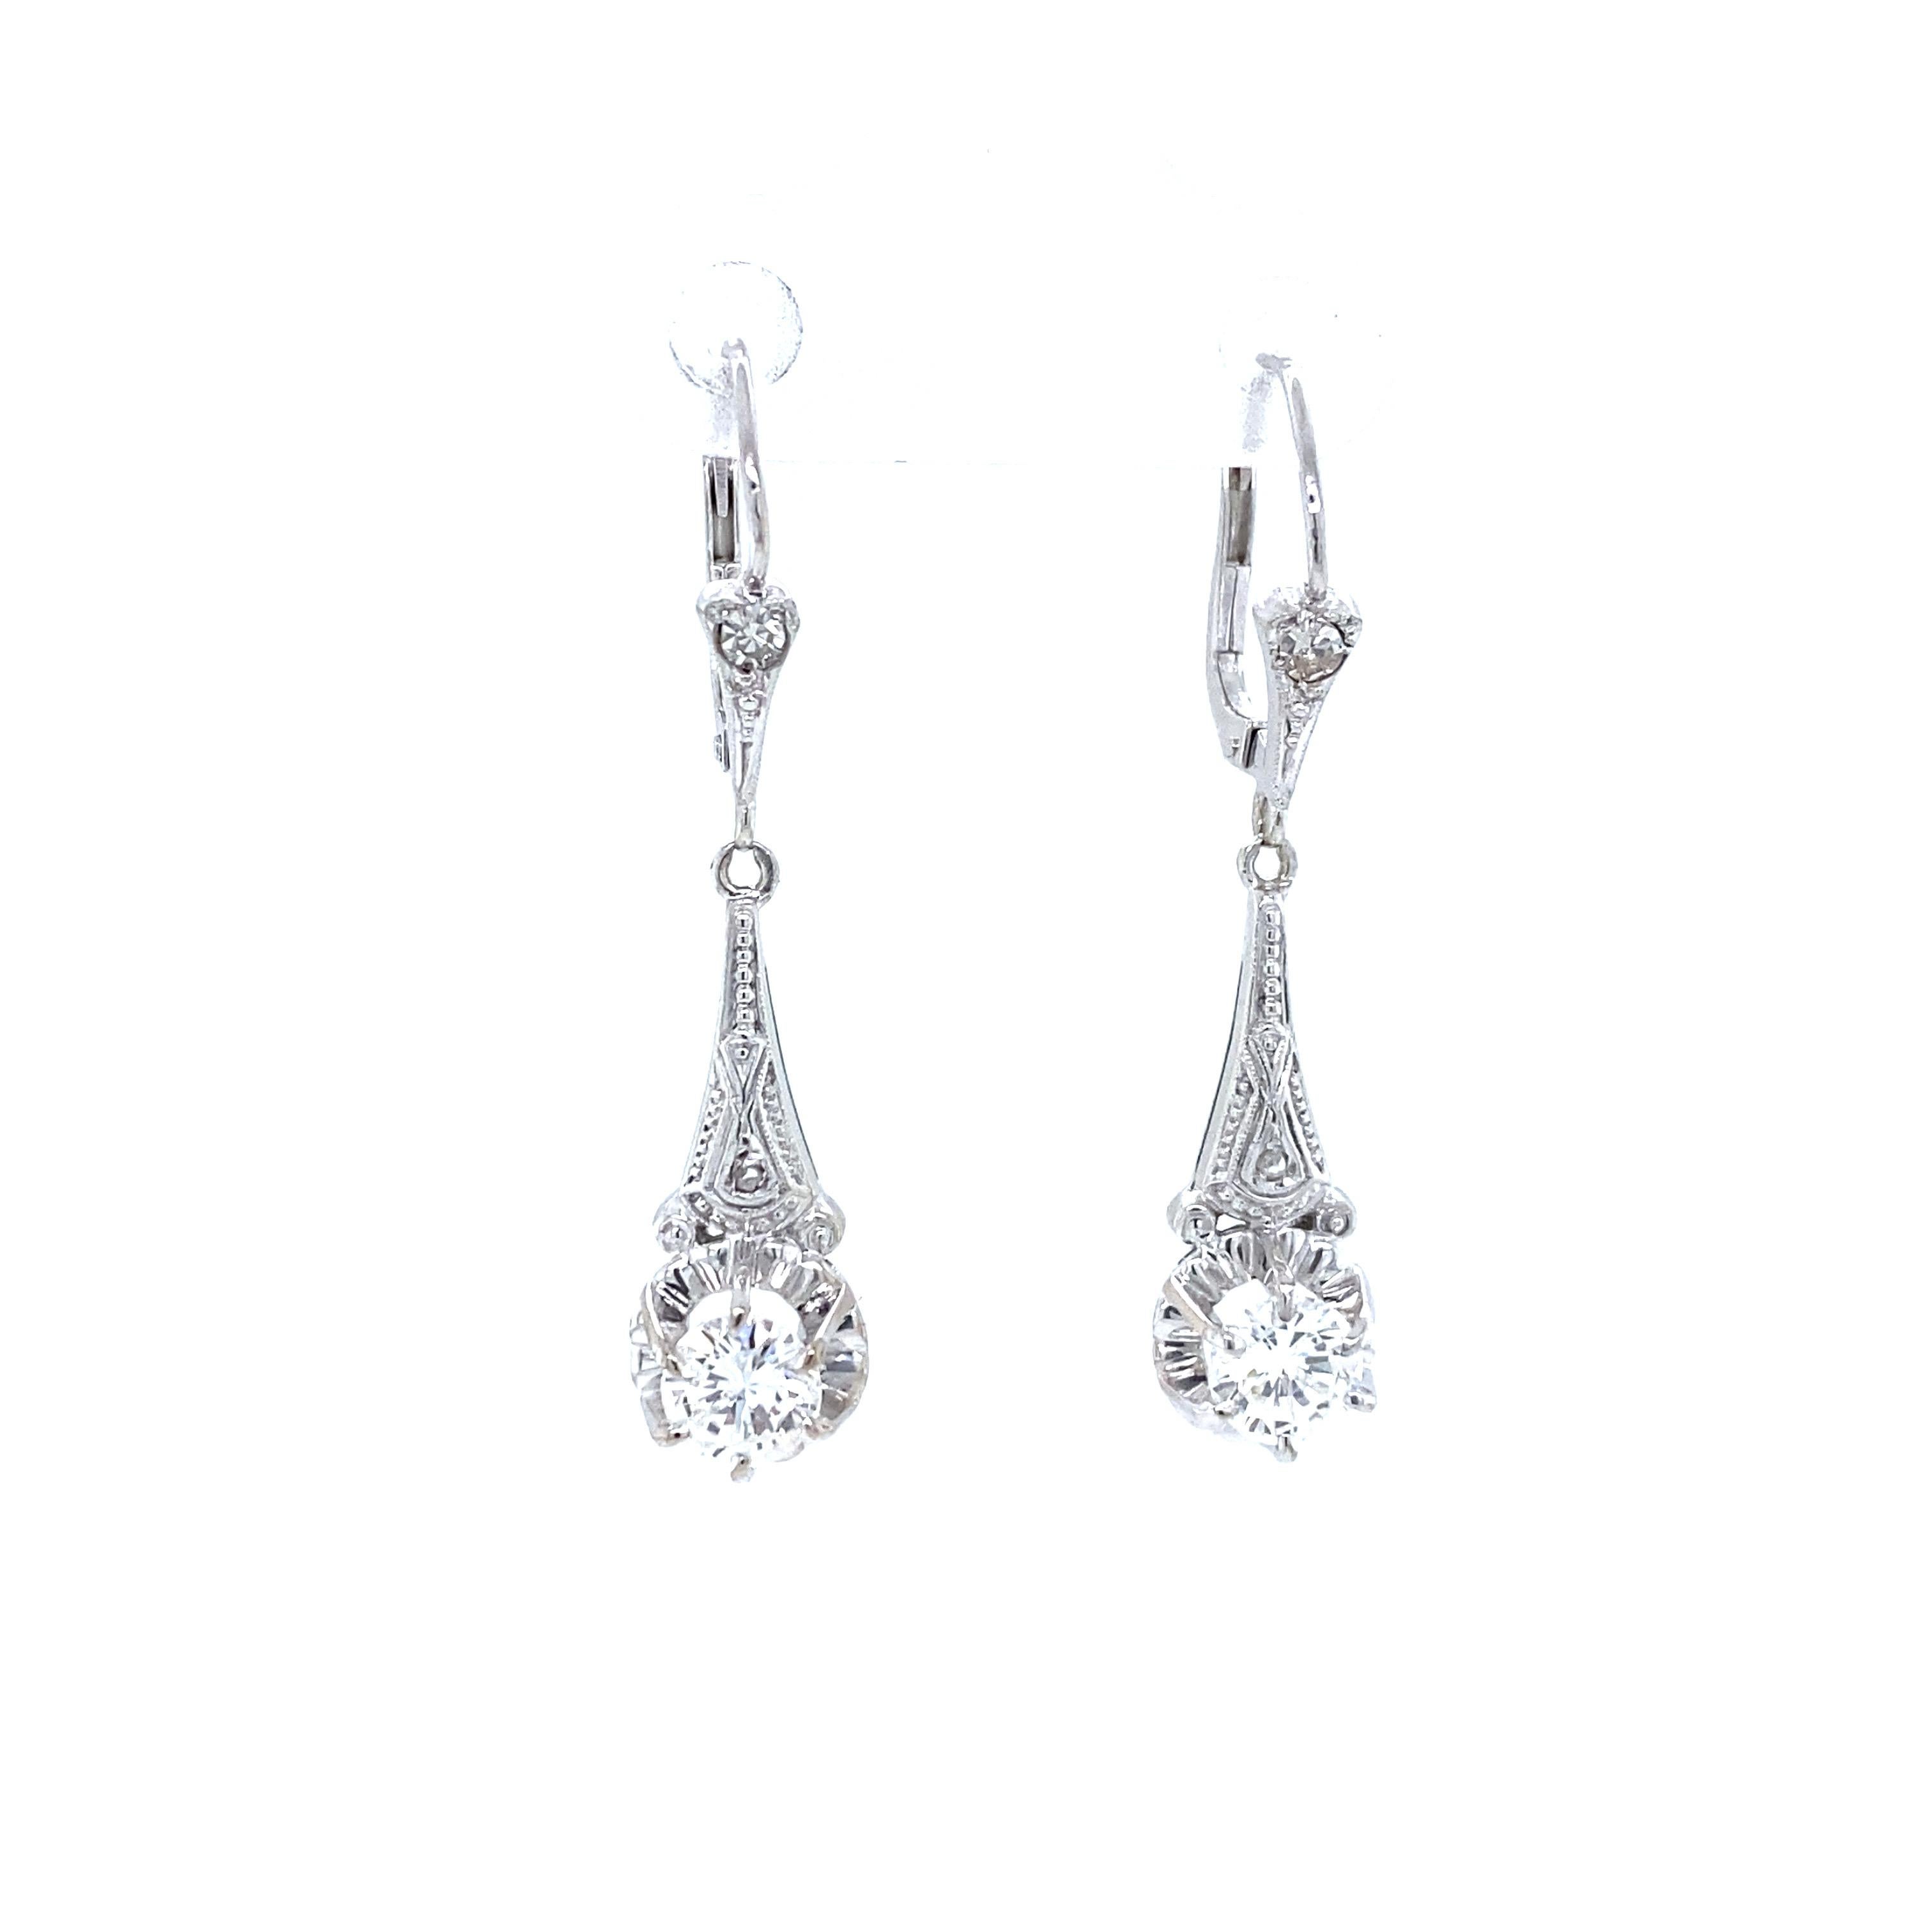 Diamond Hanging Earrings in 14K White Gold.  (6) Round Brilliant Cut Diamonds weighing 0.90 carat total weight, G-H in color and SI-I1 in clarity are expertly set.  The Earrings measure 1 3/8 inch in length and 5/16 inch in width at the widest